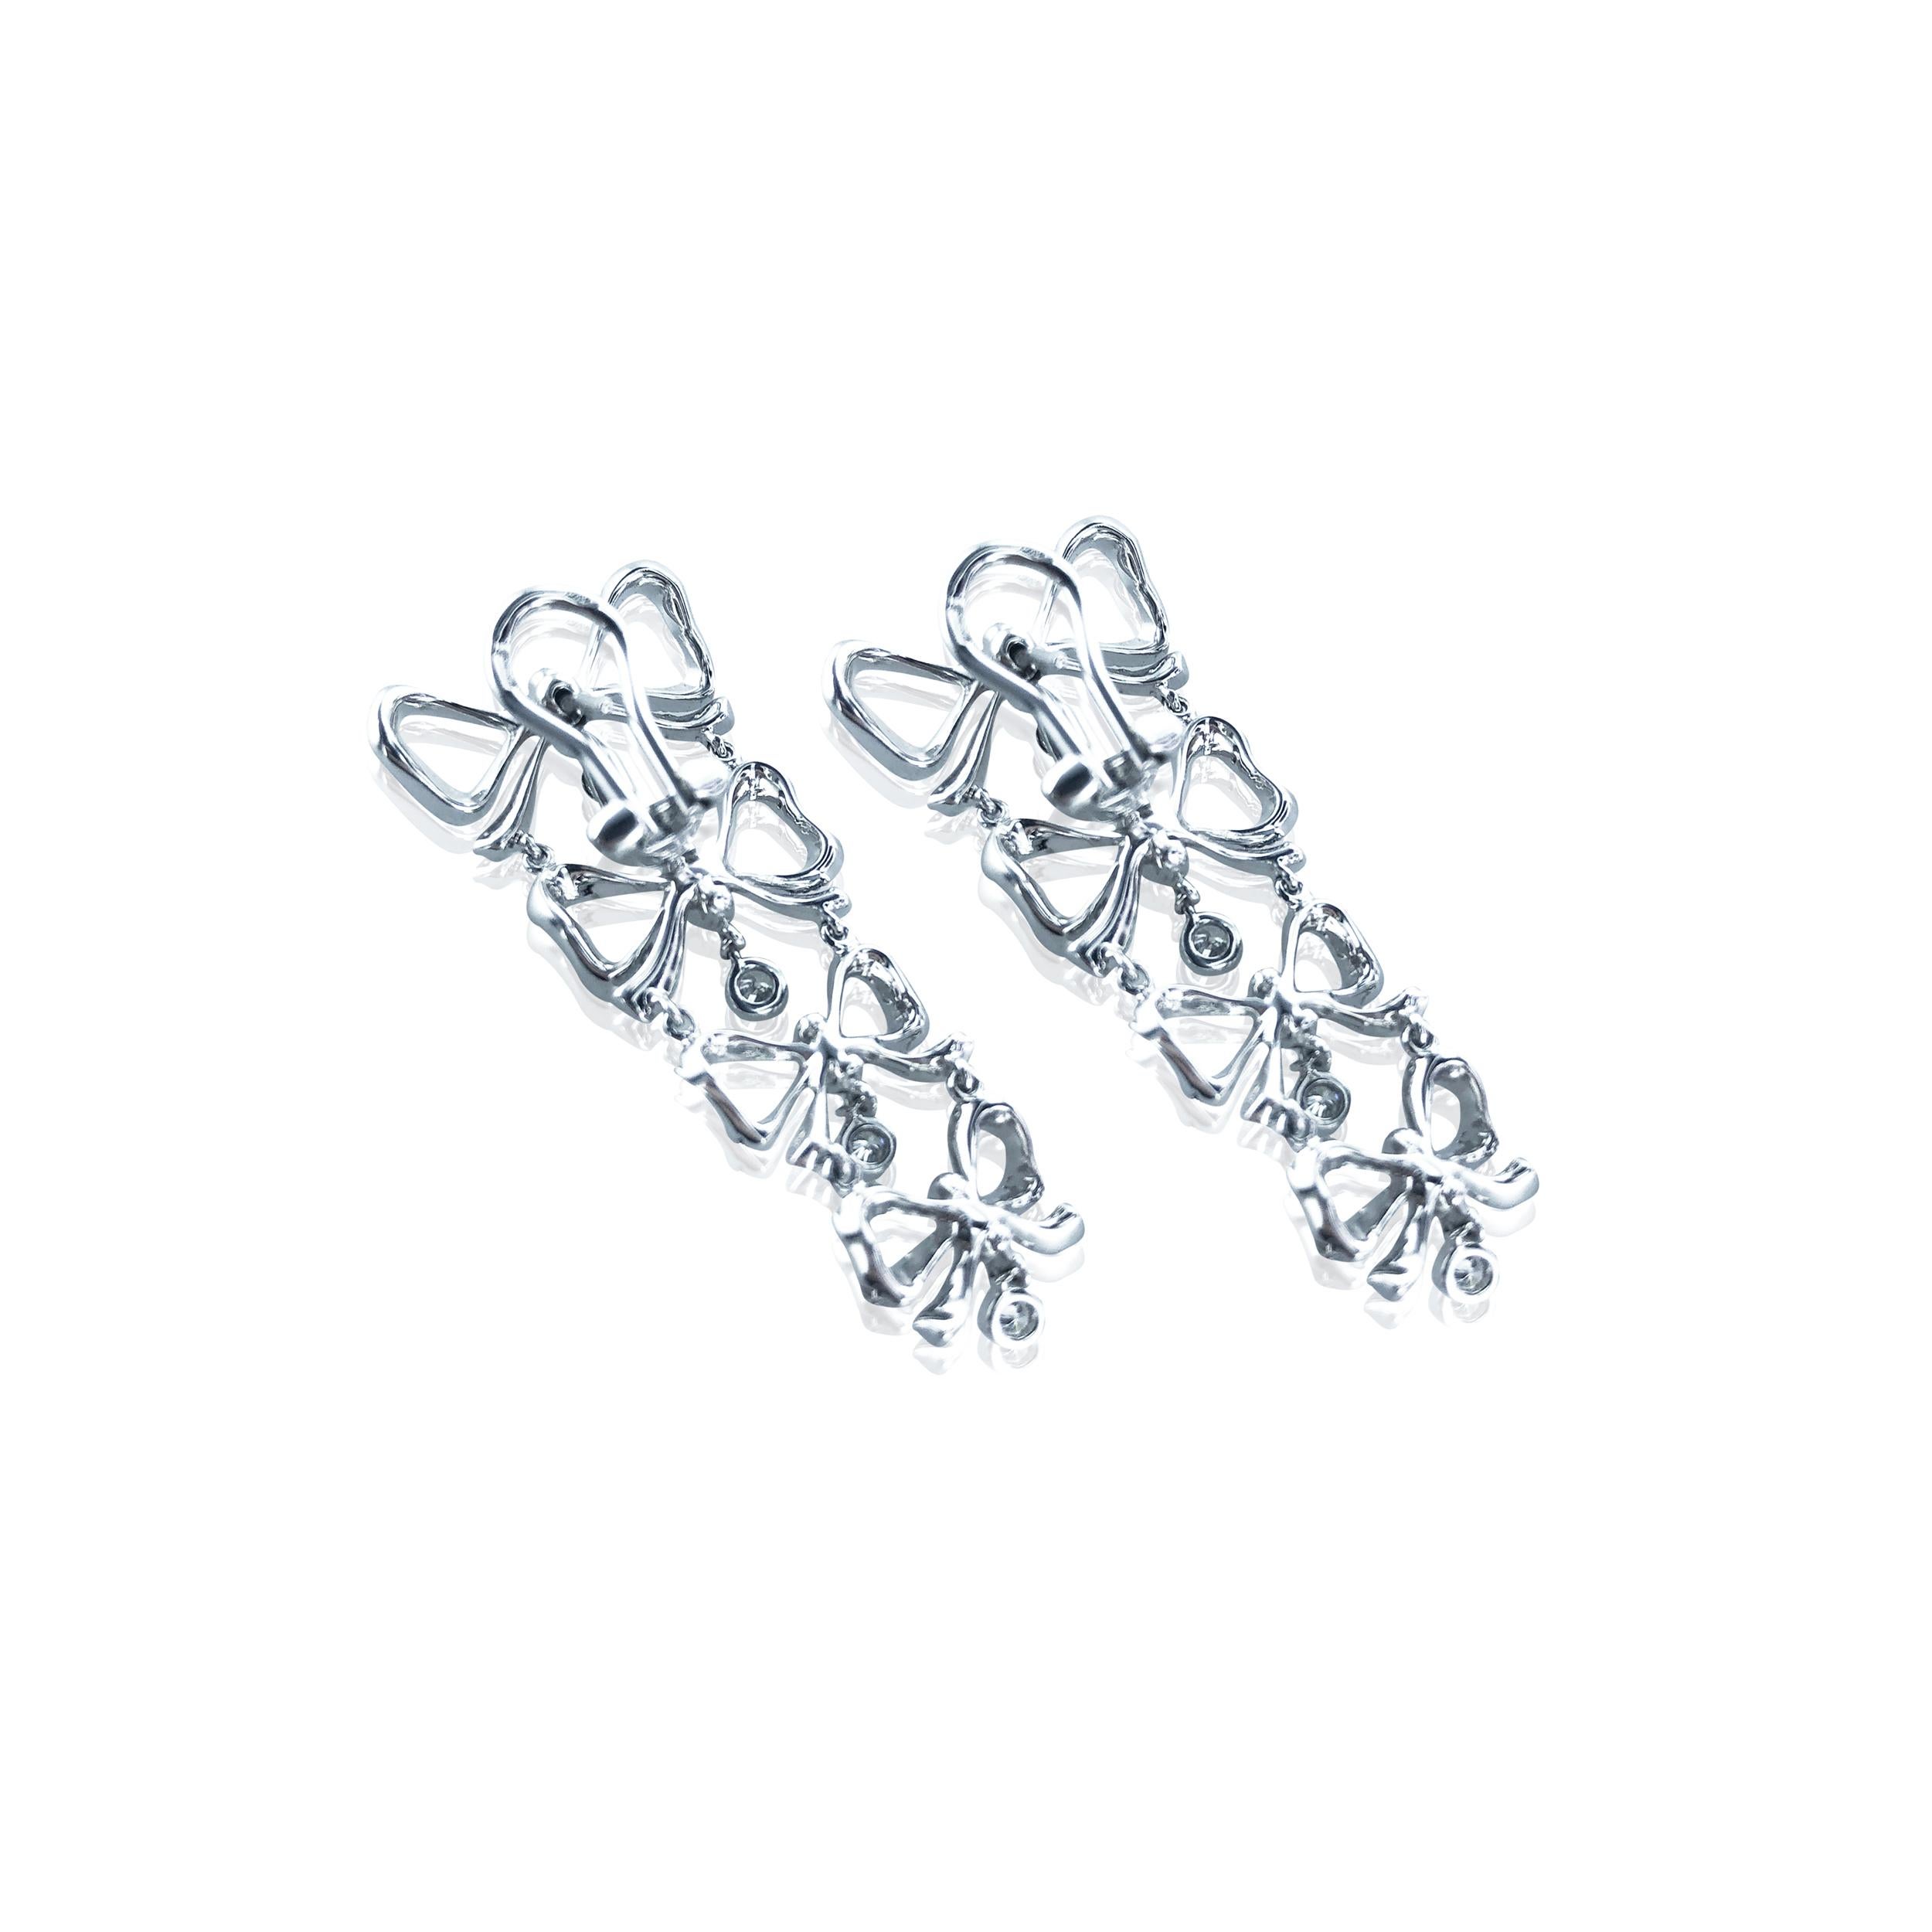 These Stefan Hafner 1.52 Carat Diamond Birthday Bow dangling earrings, consist of 4 bows decreasing in size with a dangling round diamond at the bottom of each. 
Set in 18kt white Gold with latch back closures, they are fashionable and modern